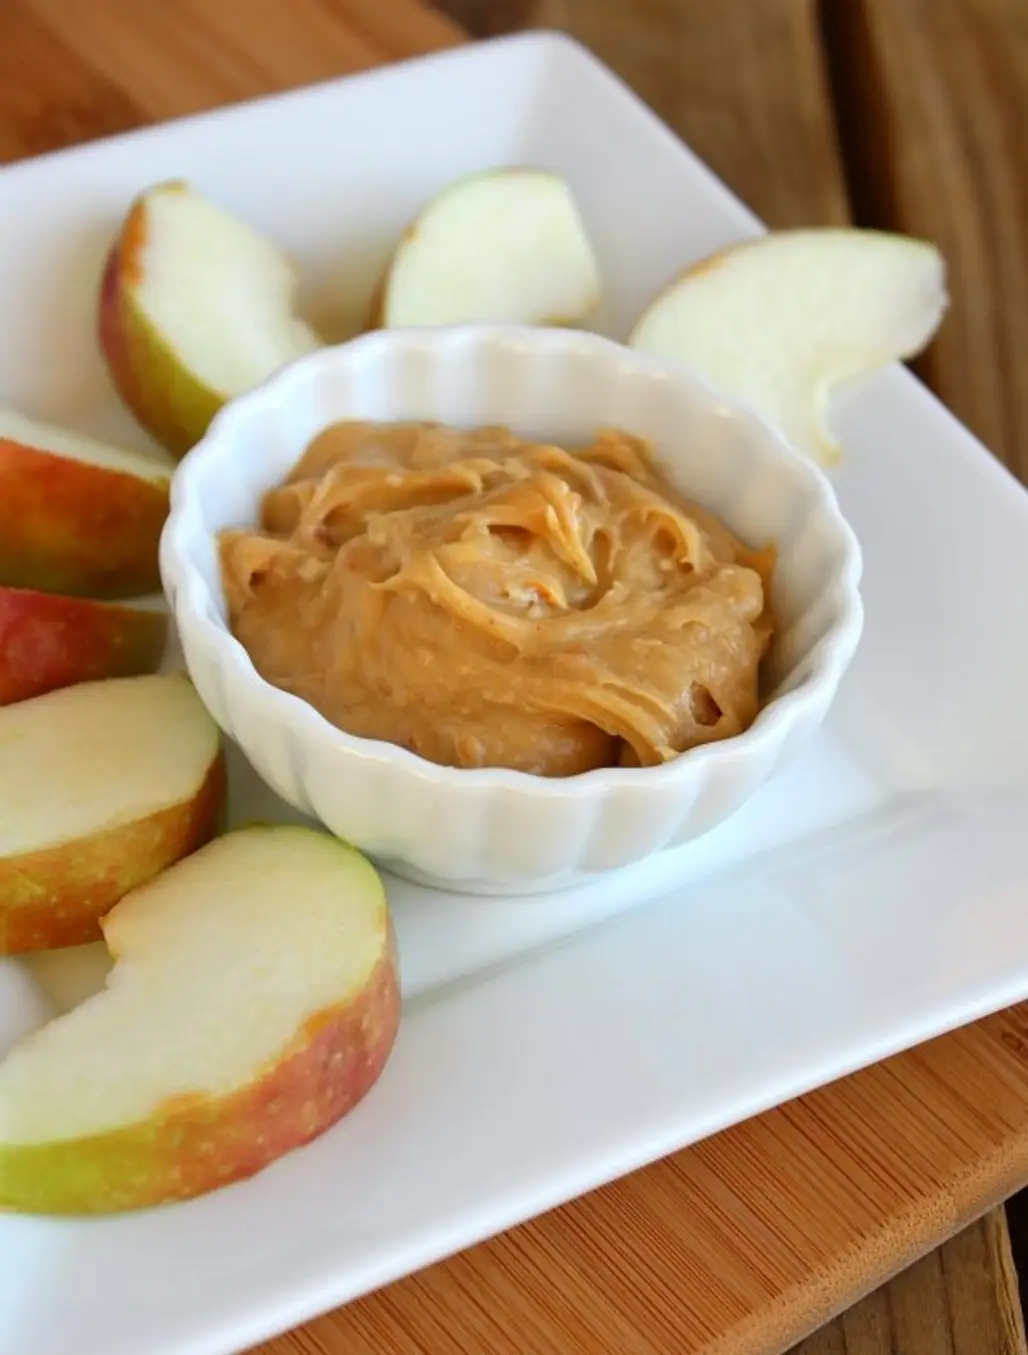 Apple and Peanut Butter